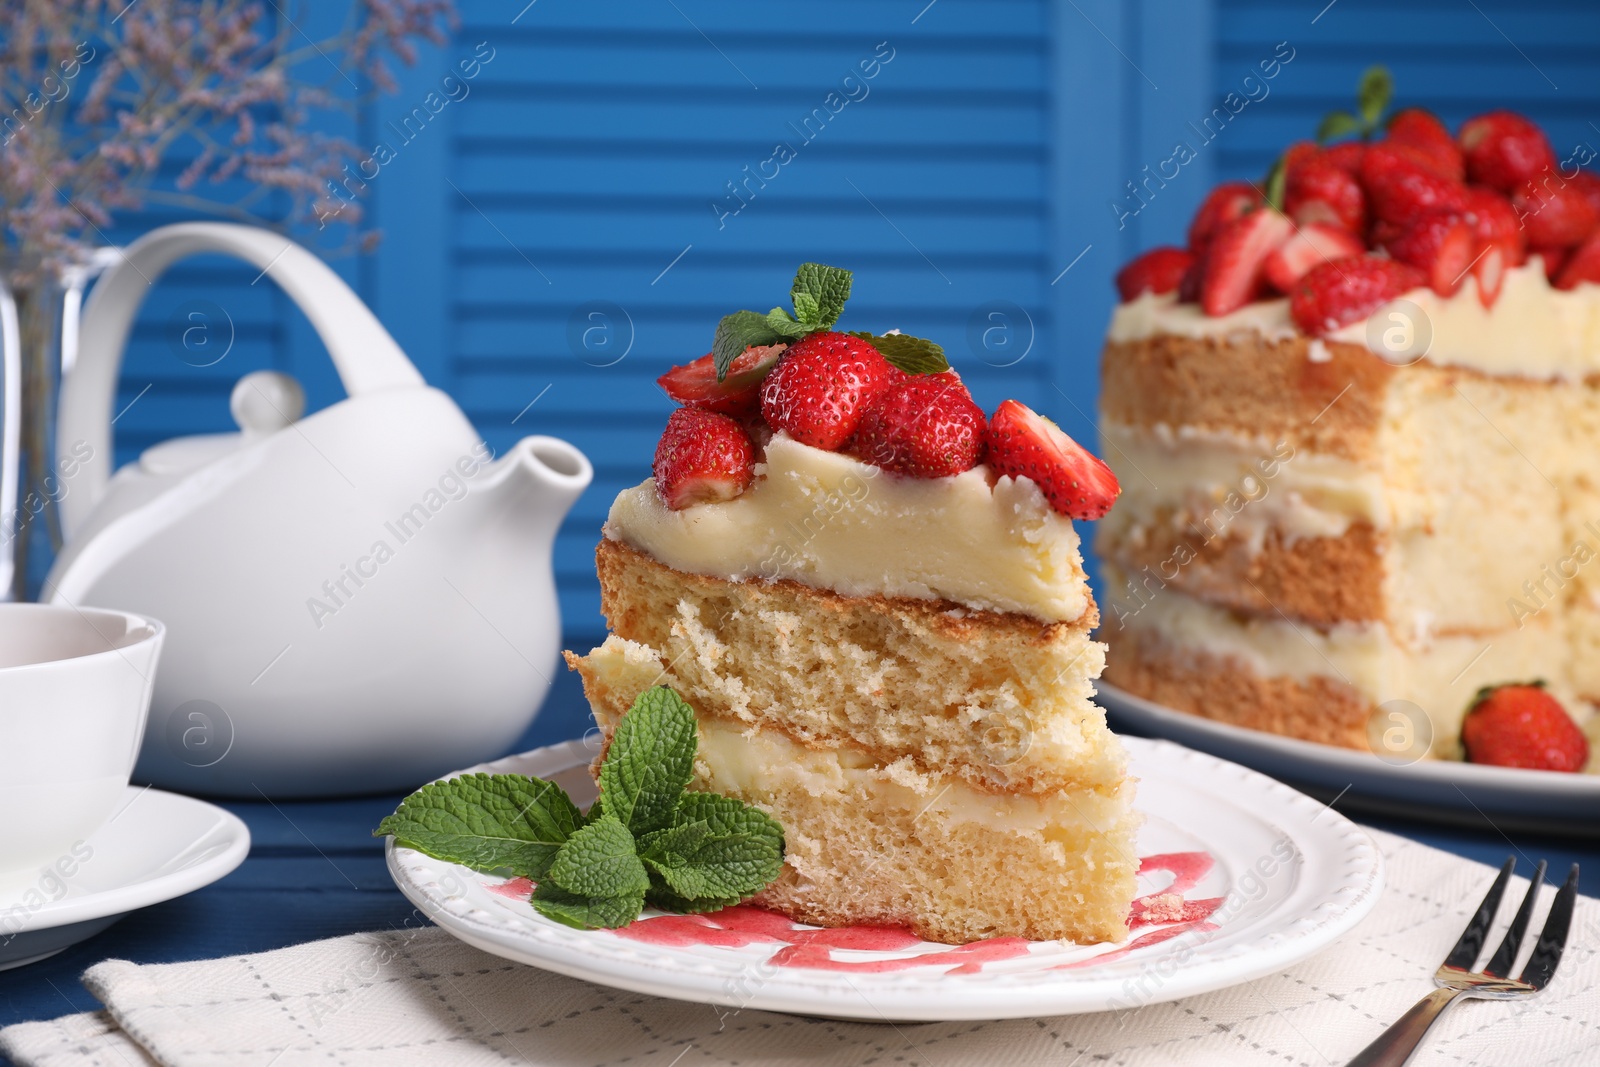 Photo of Piece of tasty cake with fresh strawberries, mint and cup of tea on table